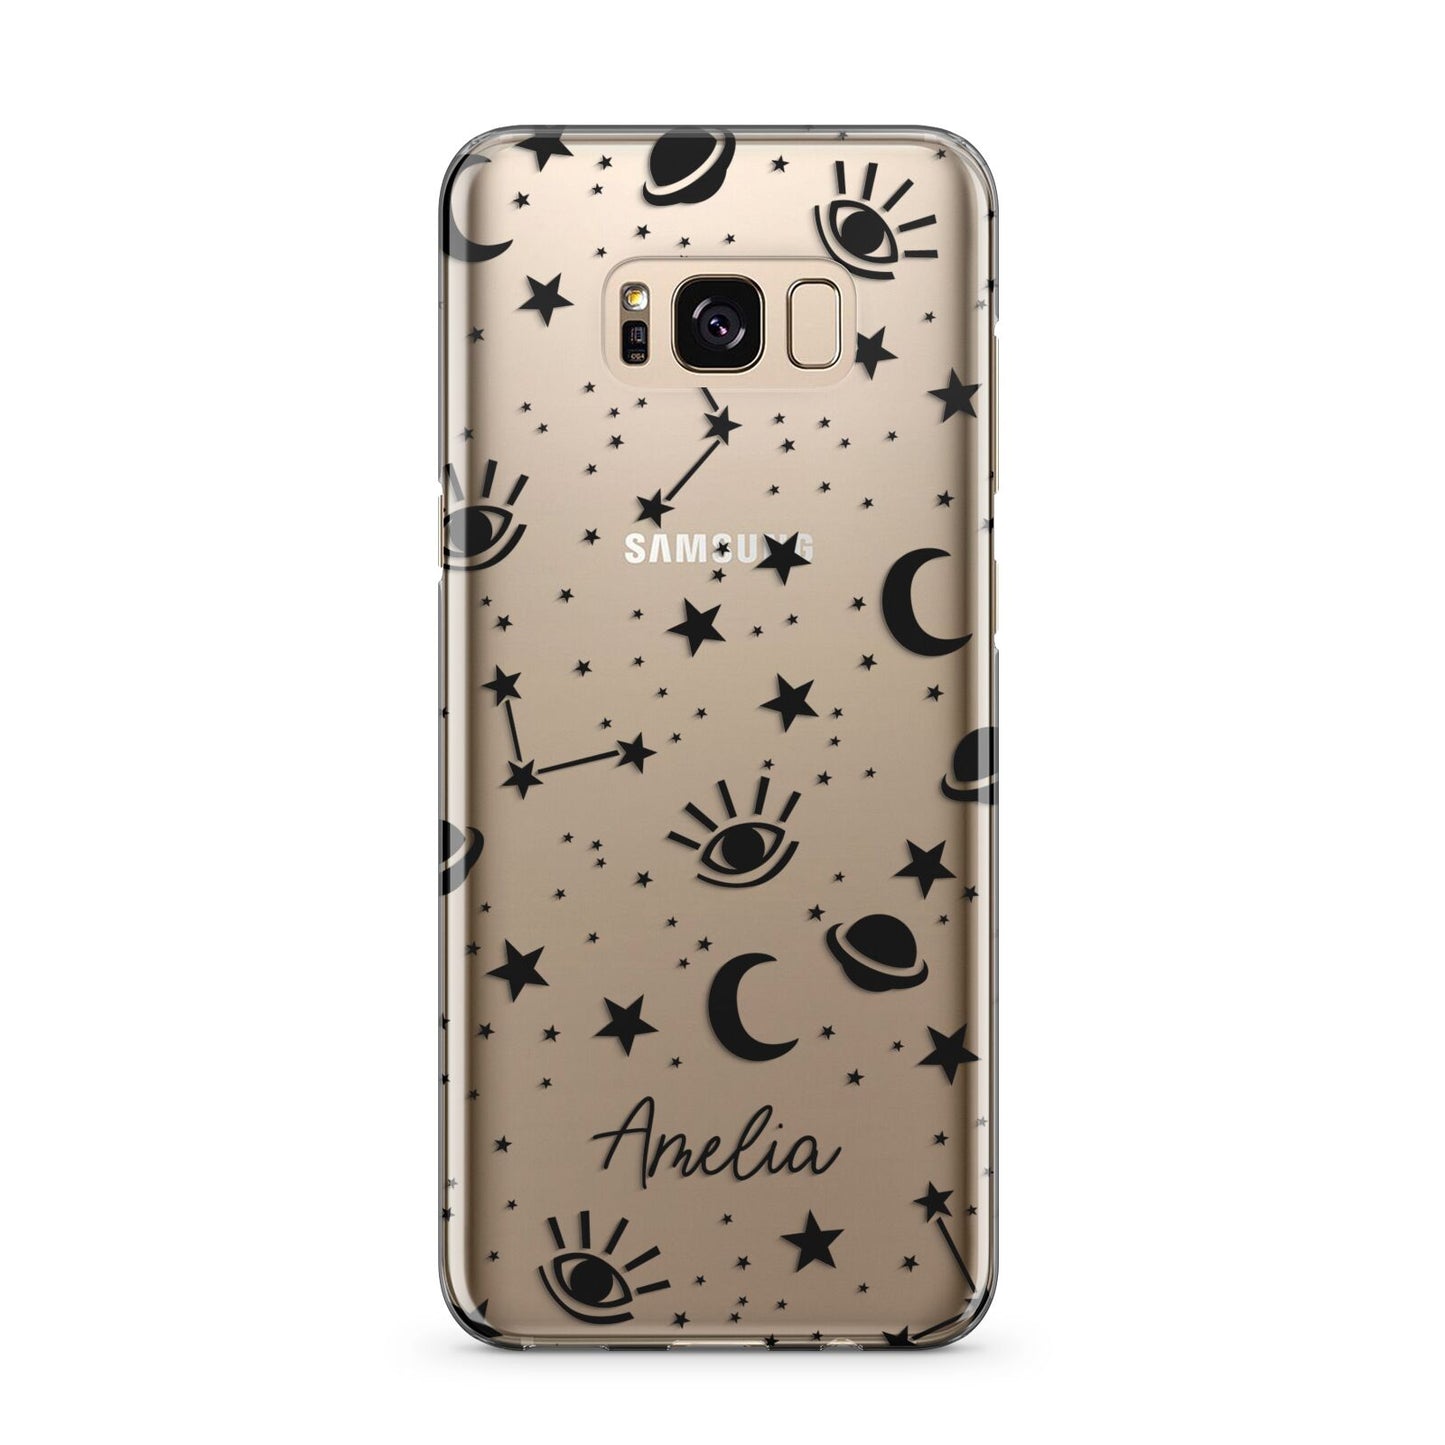 Monochrome Zodiac Constellations with Name Samsung Galaxy S8 Plus Case